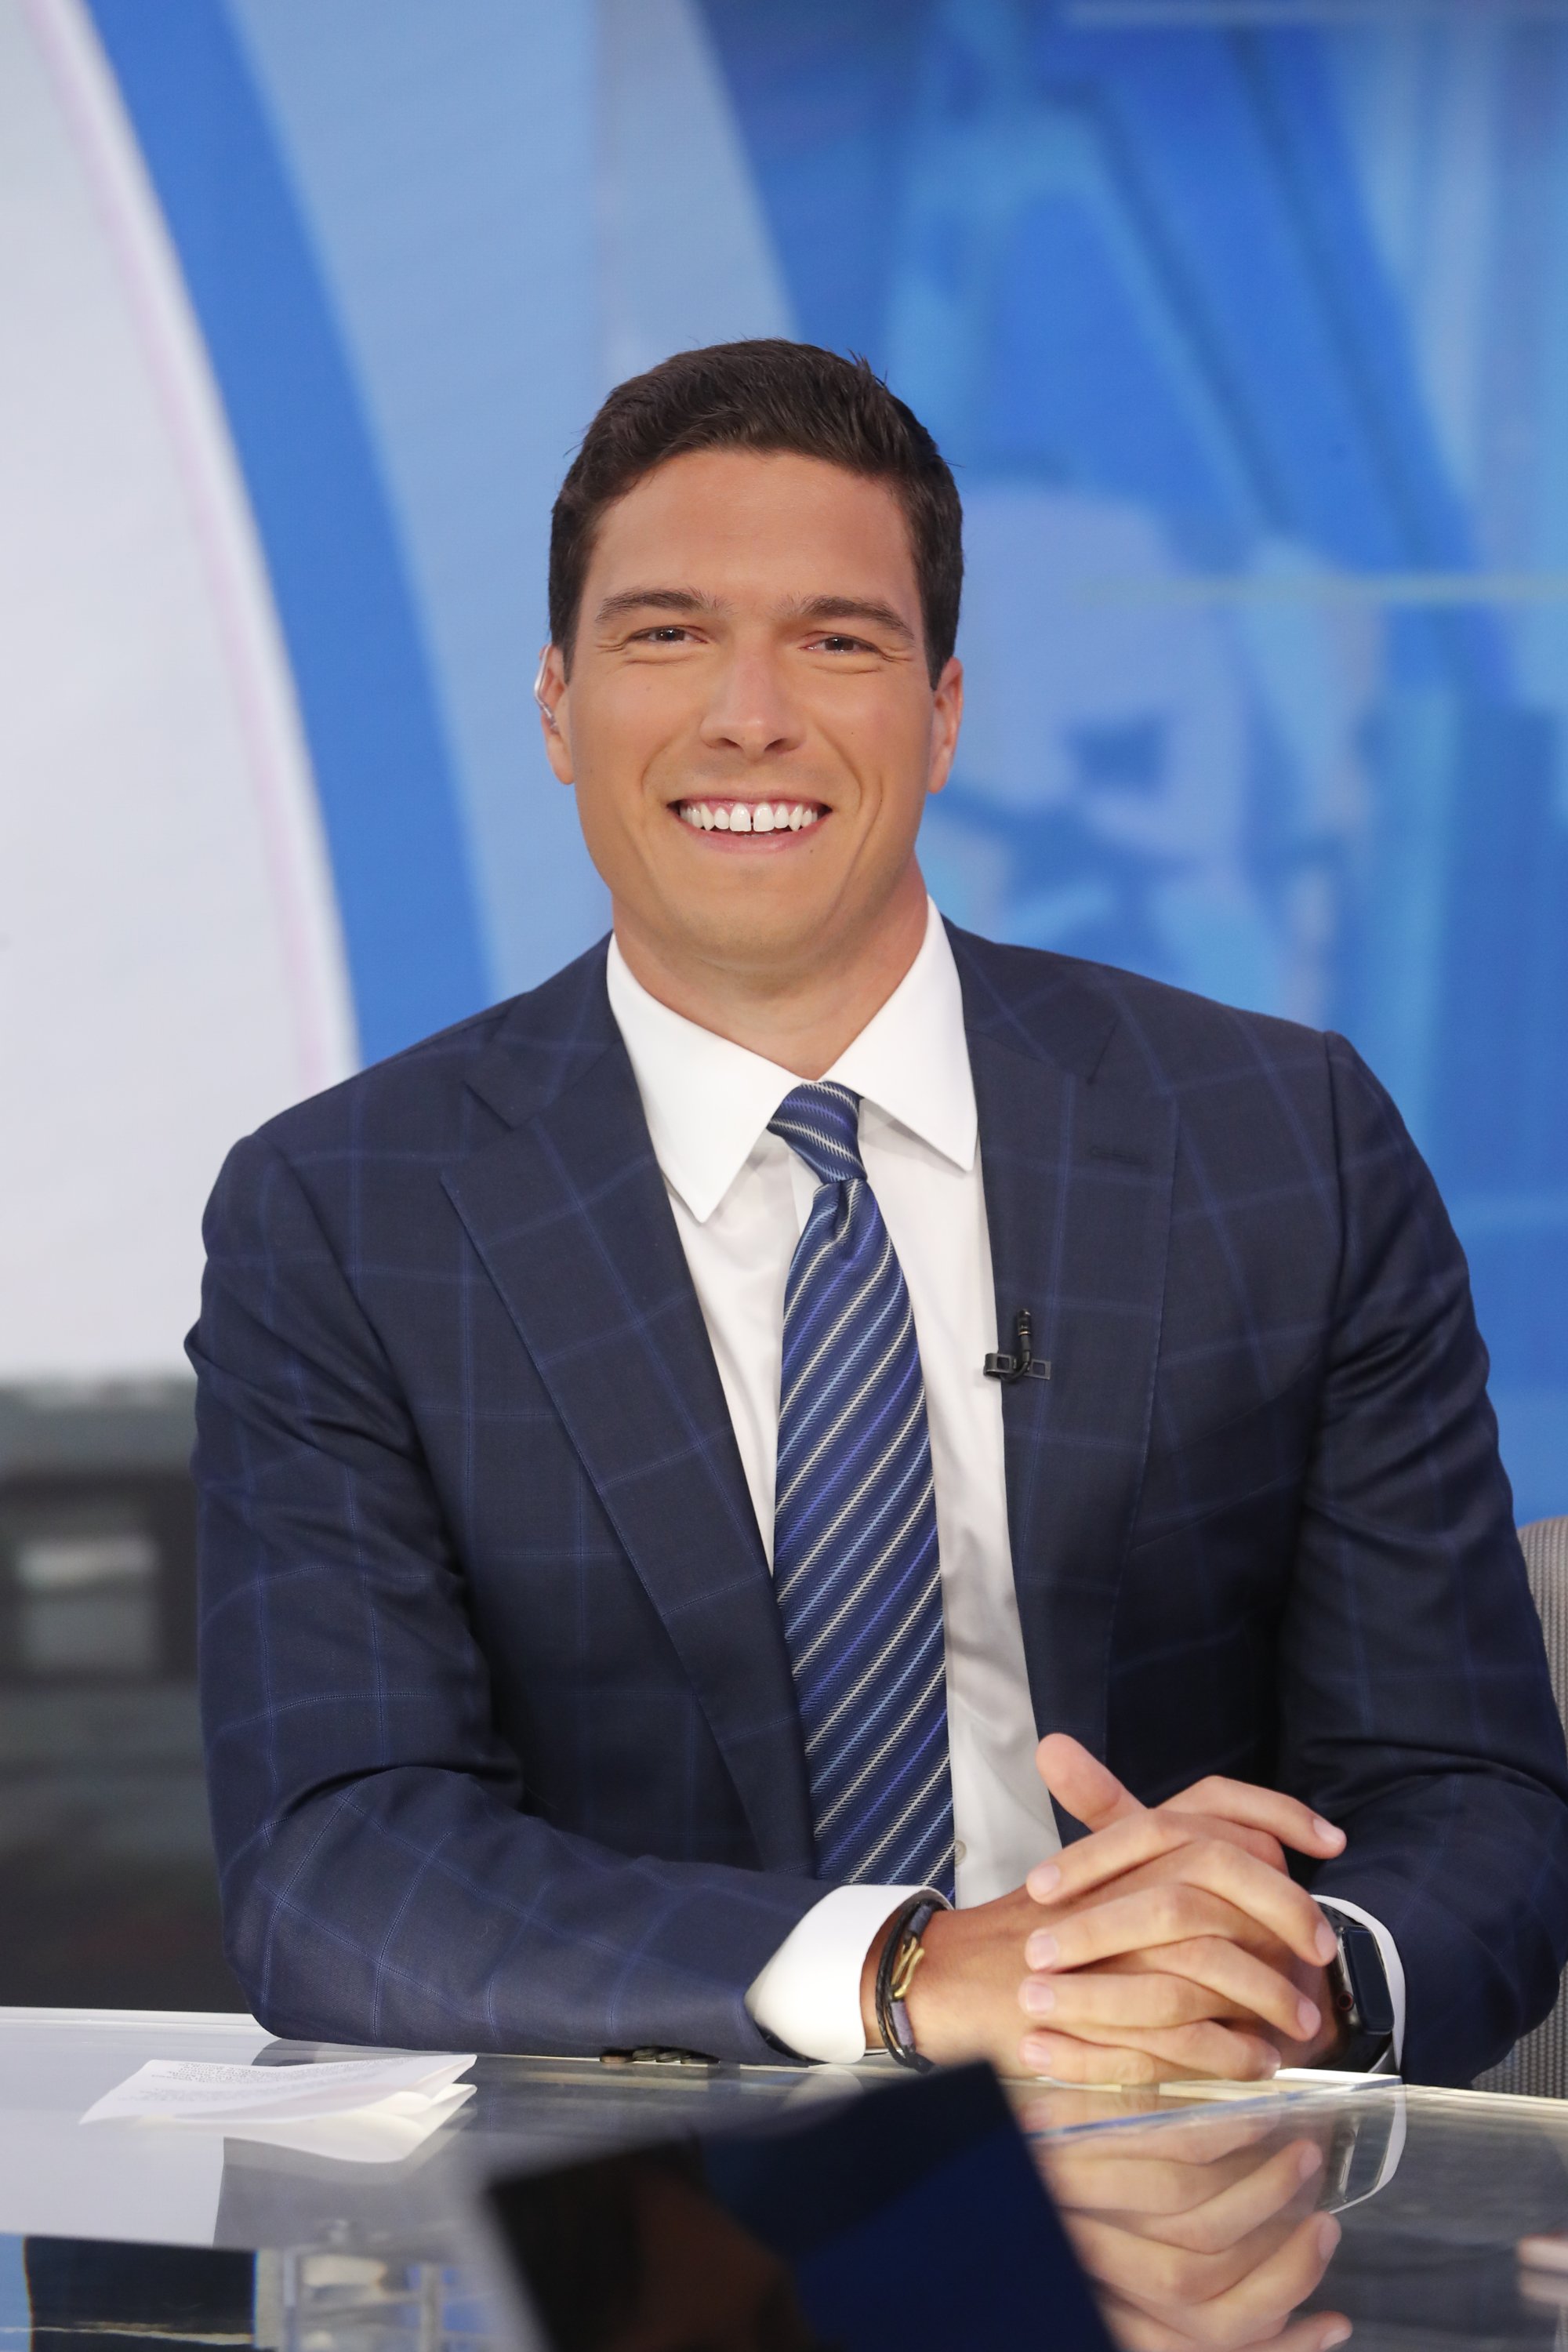 Will Reeve on "Good Morning America" set on August 21, 2019 | Source: Getty Images